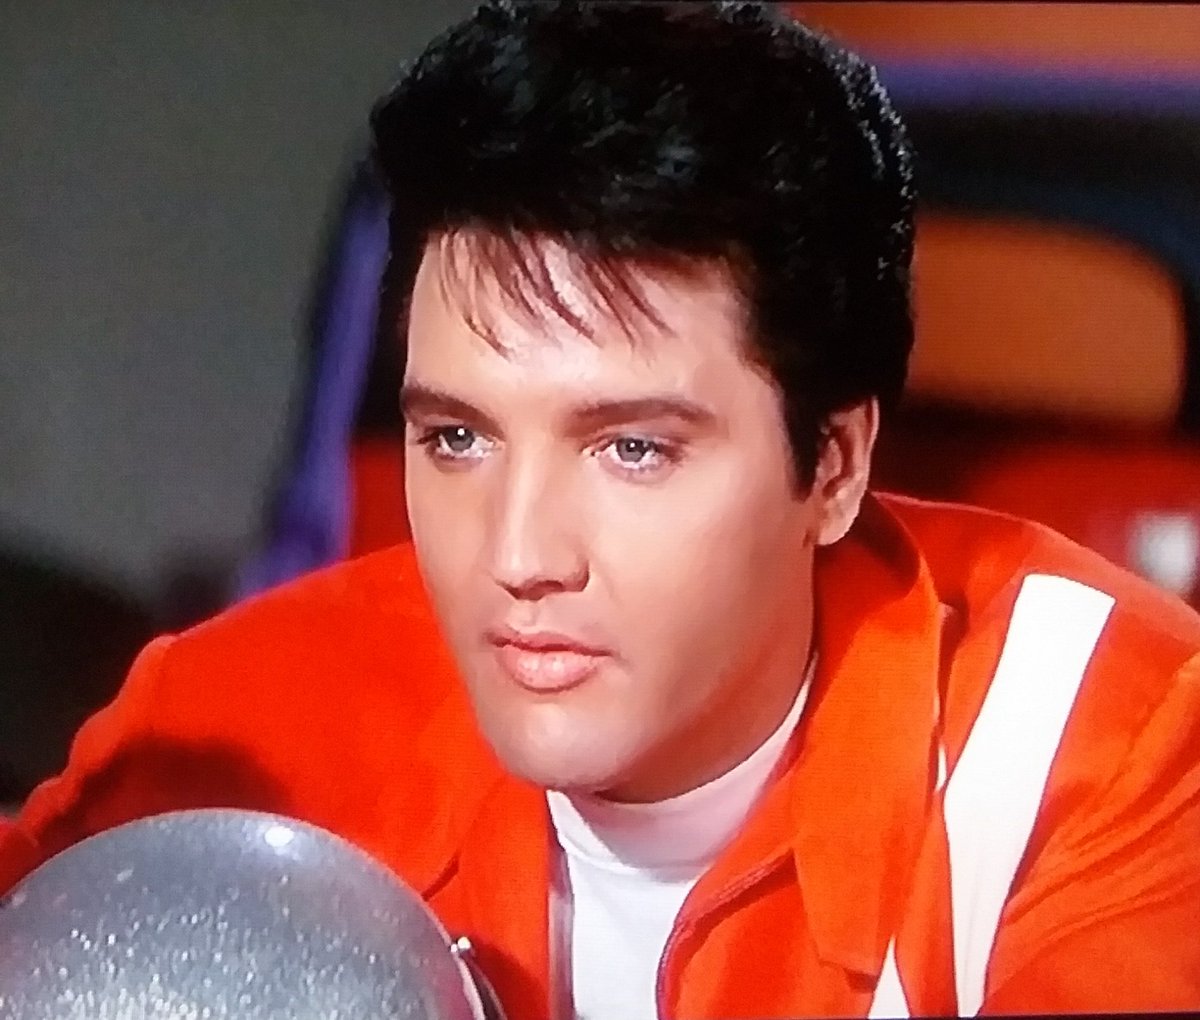 Let's not kid ourselves. Elvis was a mimbo in these movies. He sang and flirted. #tcmparty #Speedway